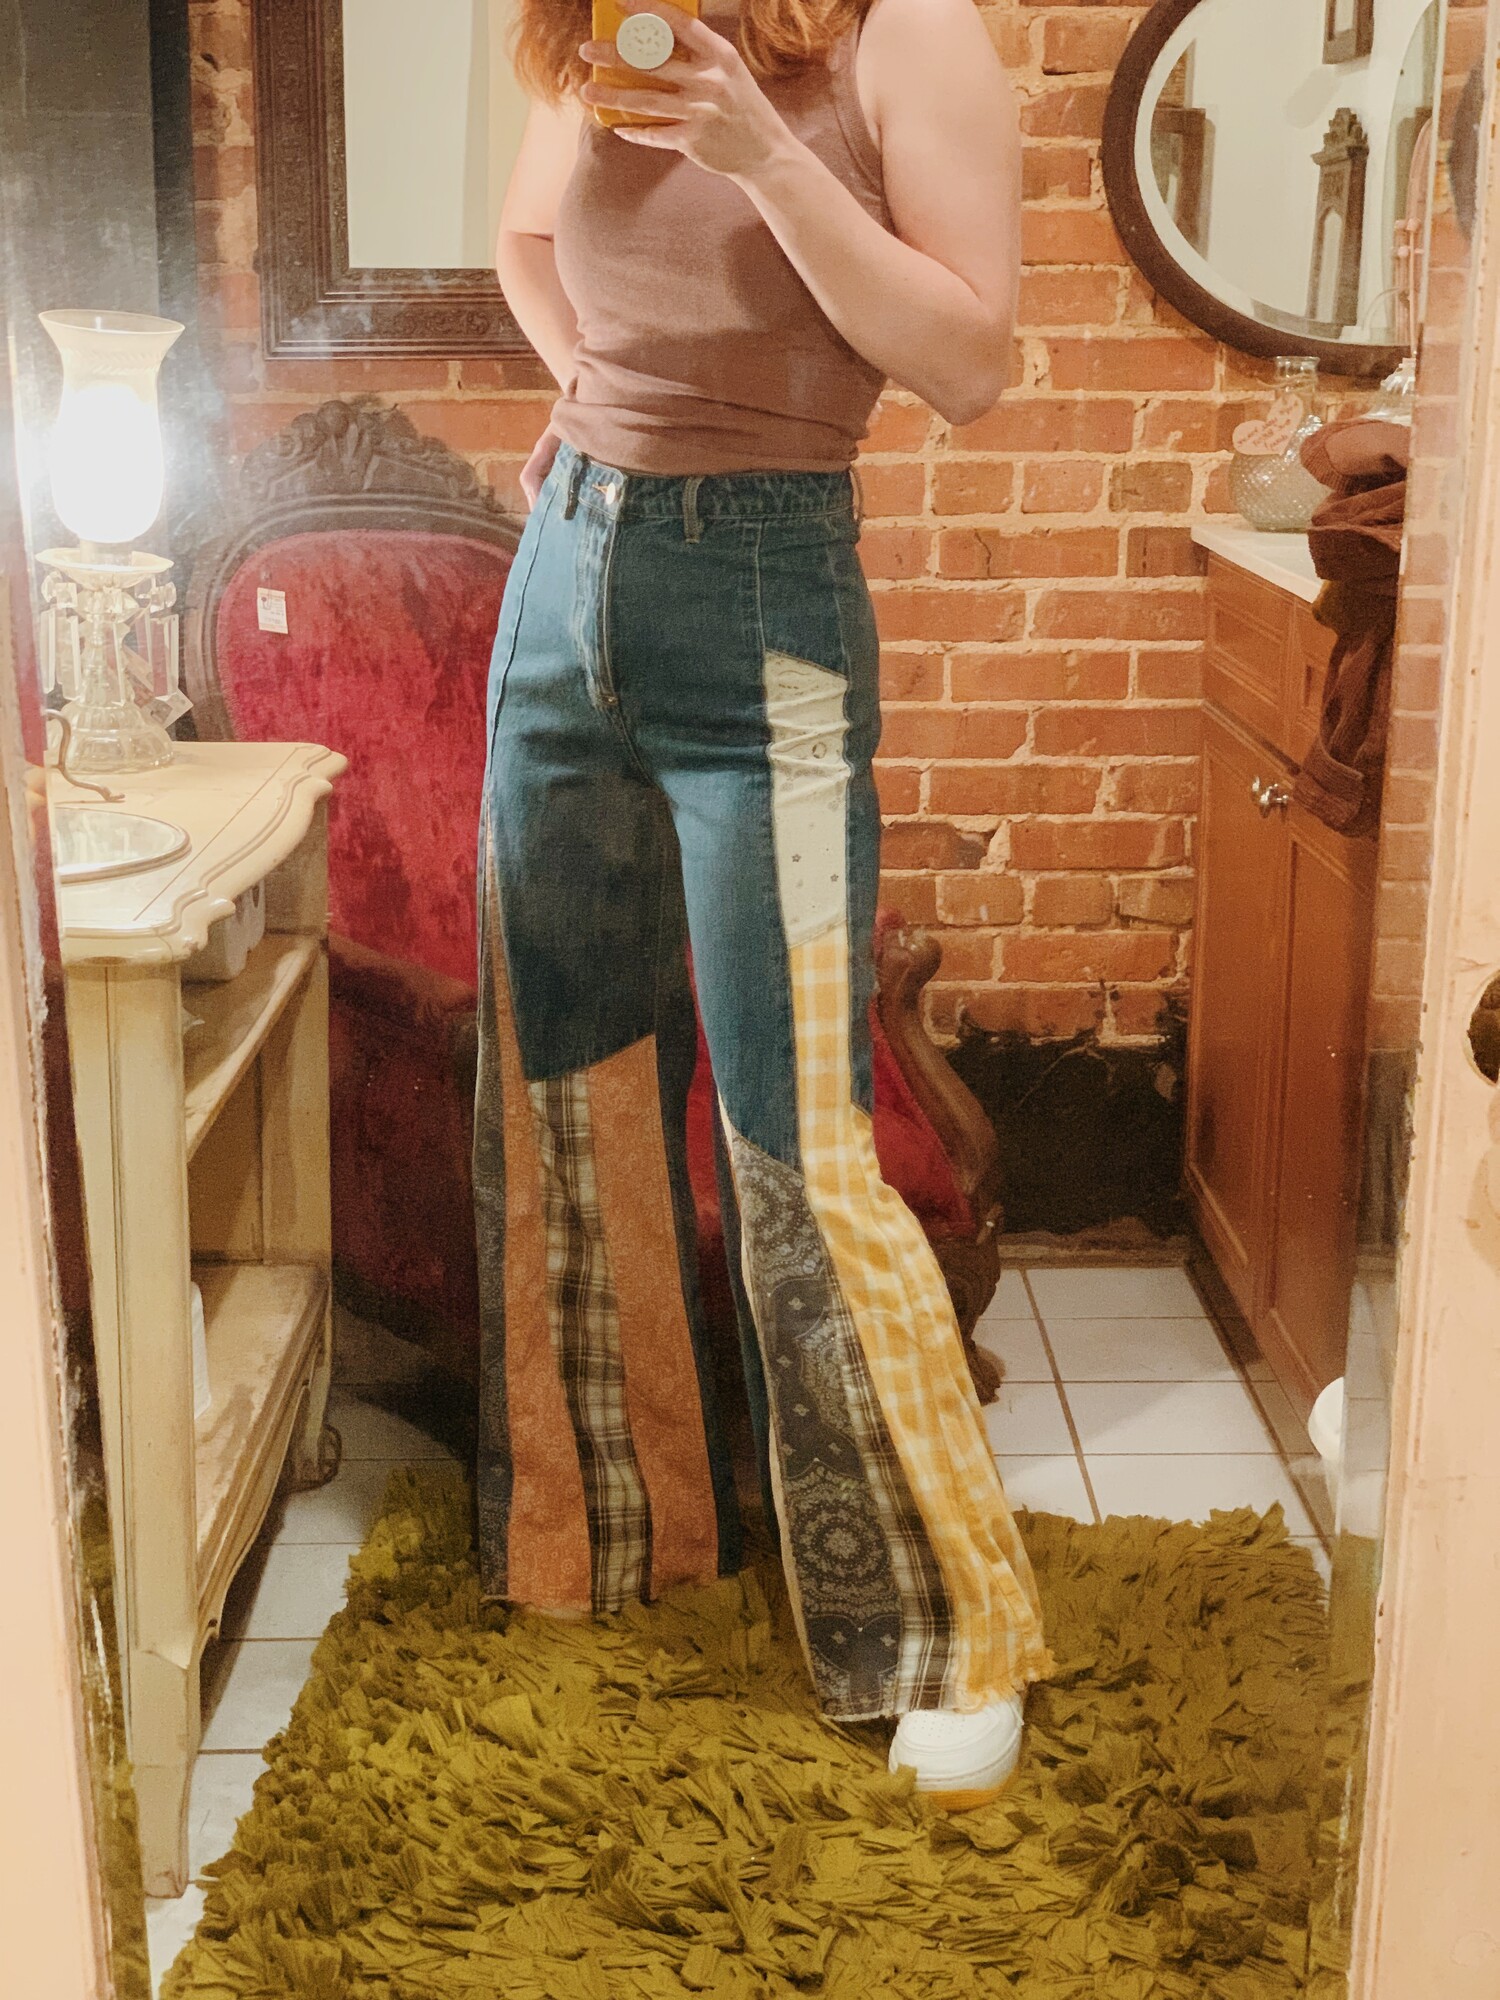 These patchwork jeans are absolutely fabulous! Worked into the denim is an assortment of plaid and paisley patterned fabrics!
Note: These jeans do run small. See measurements below.

Small Waist: 26 (Inches)
Medium Waist: 28 (Inches)
Large Waist: 30 (Inches)